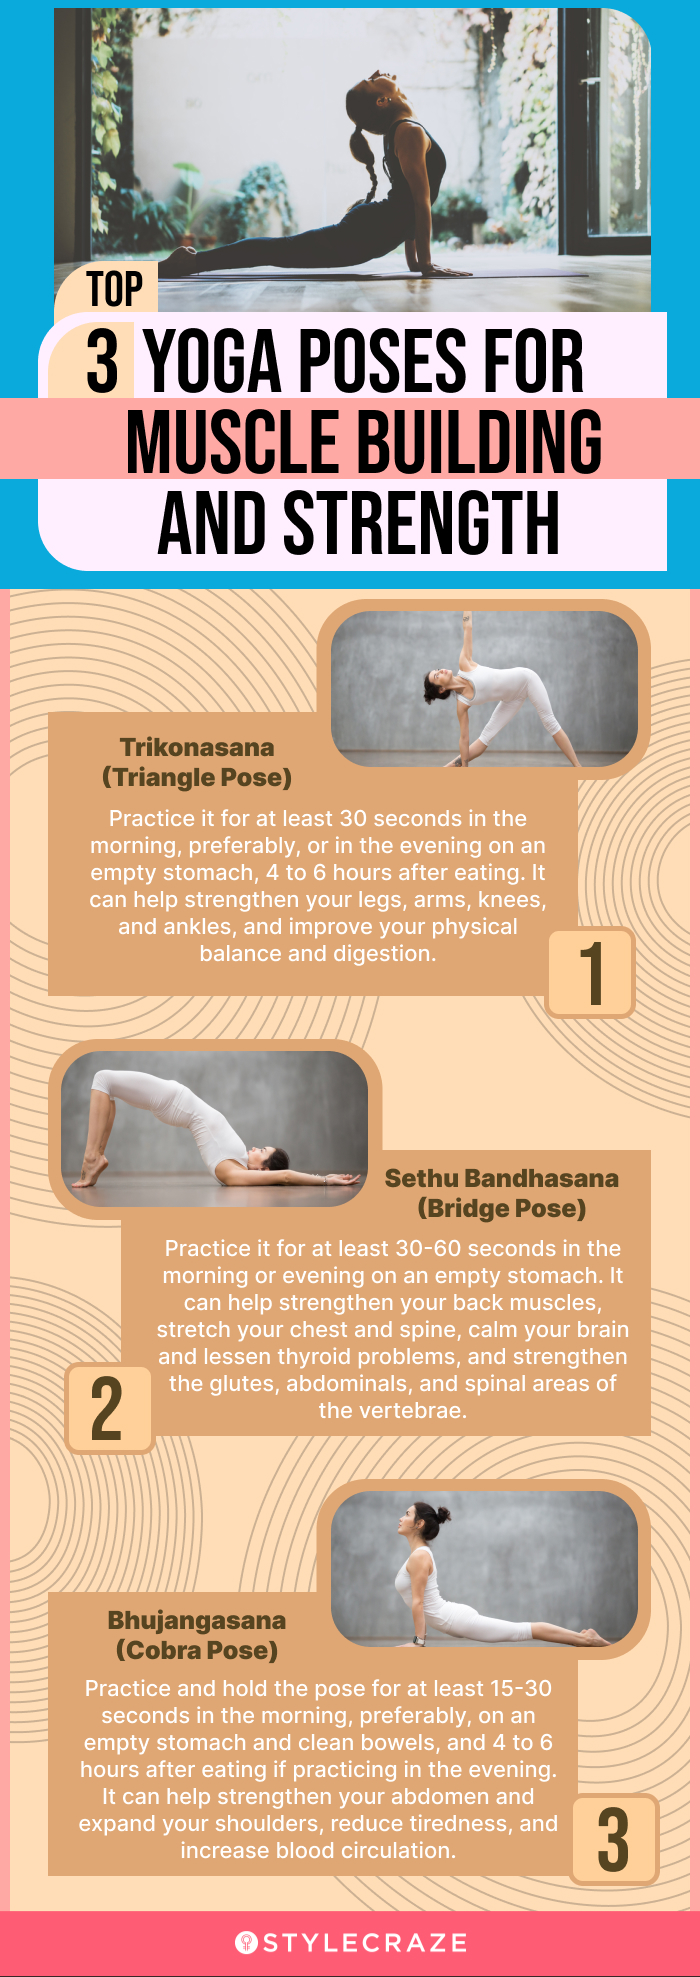 top 3 yoga poses for muscle building and strength (infographic)